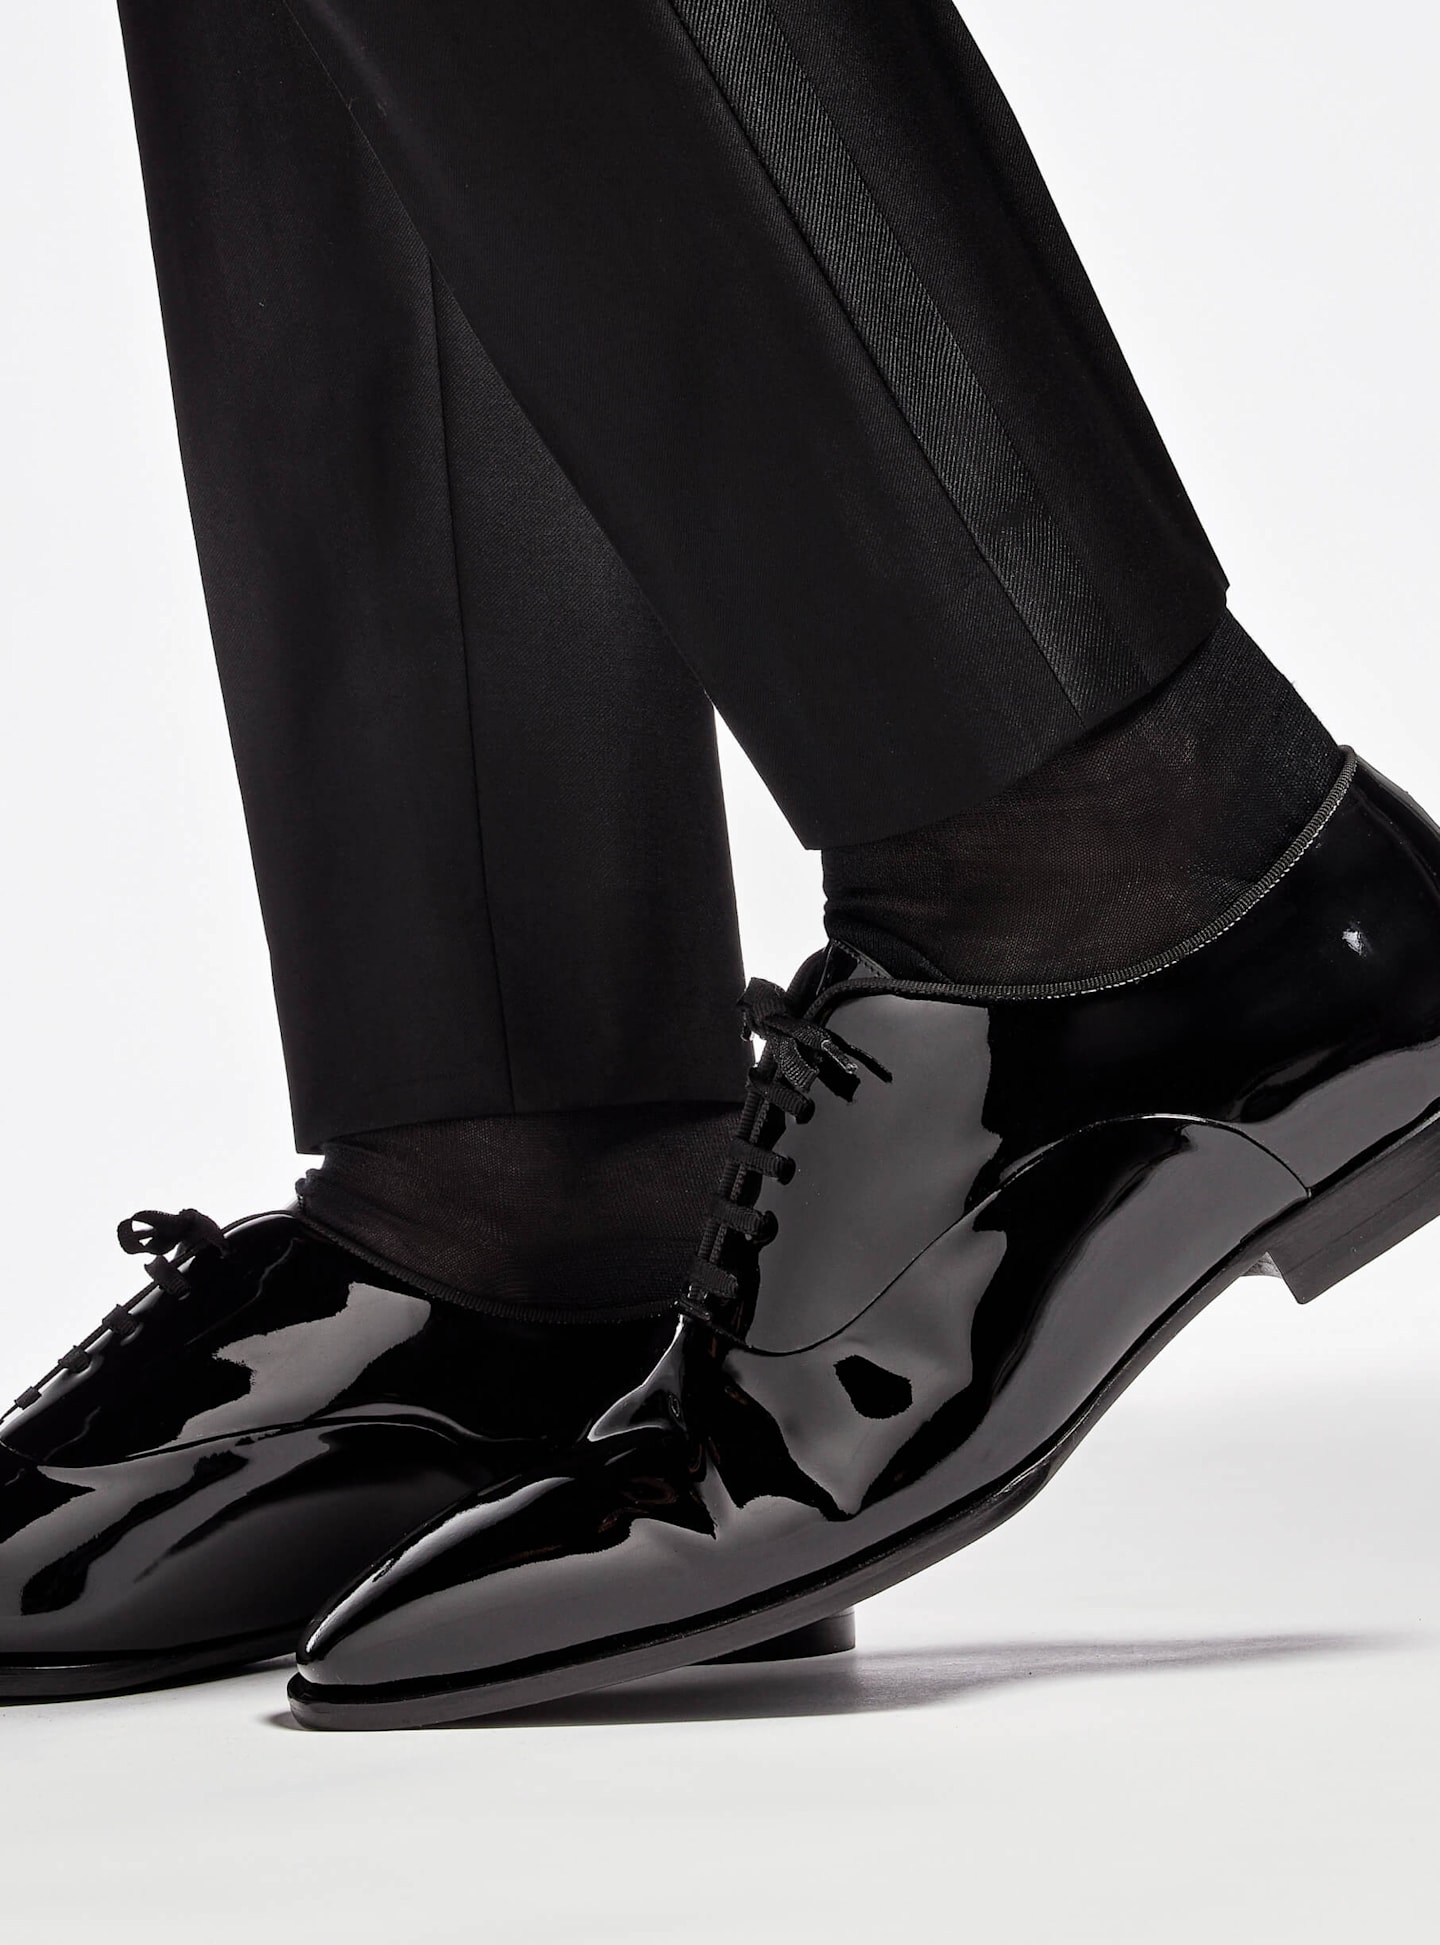 Completing the black tie tuxedo look with patent leather shoes from Suitsupply.